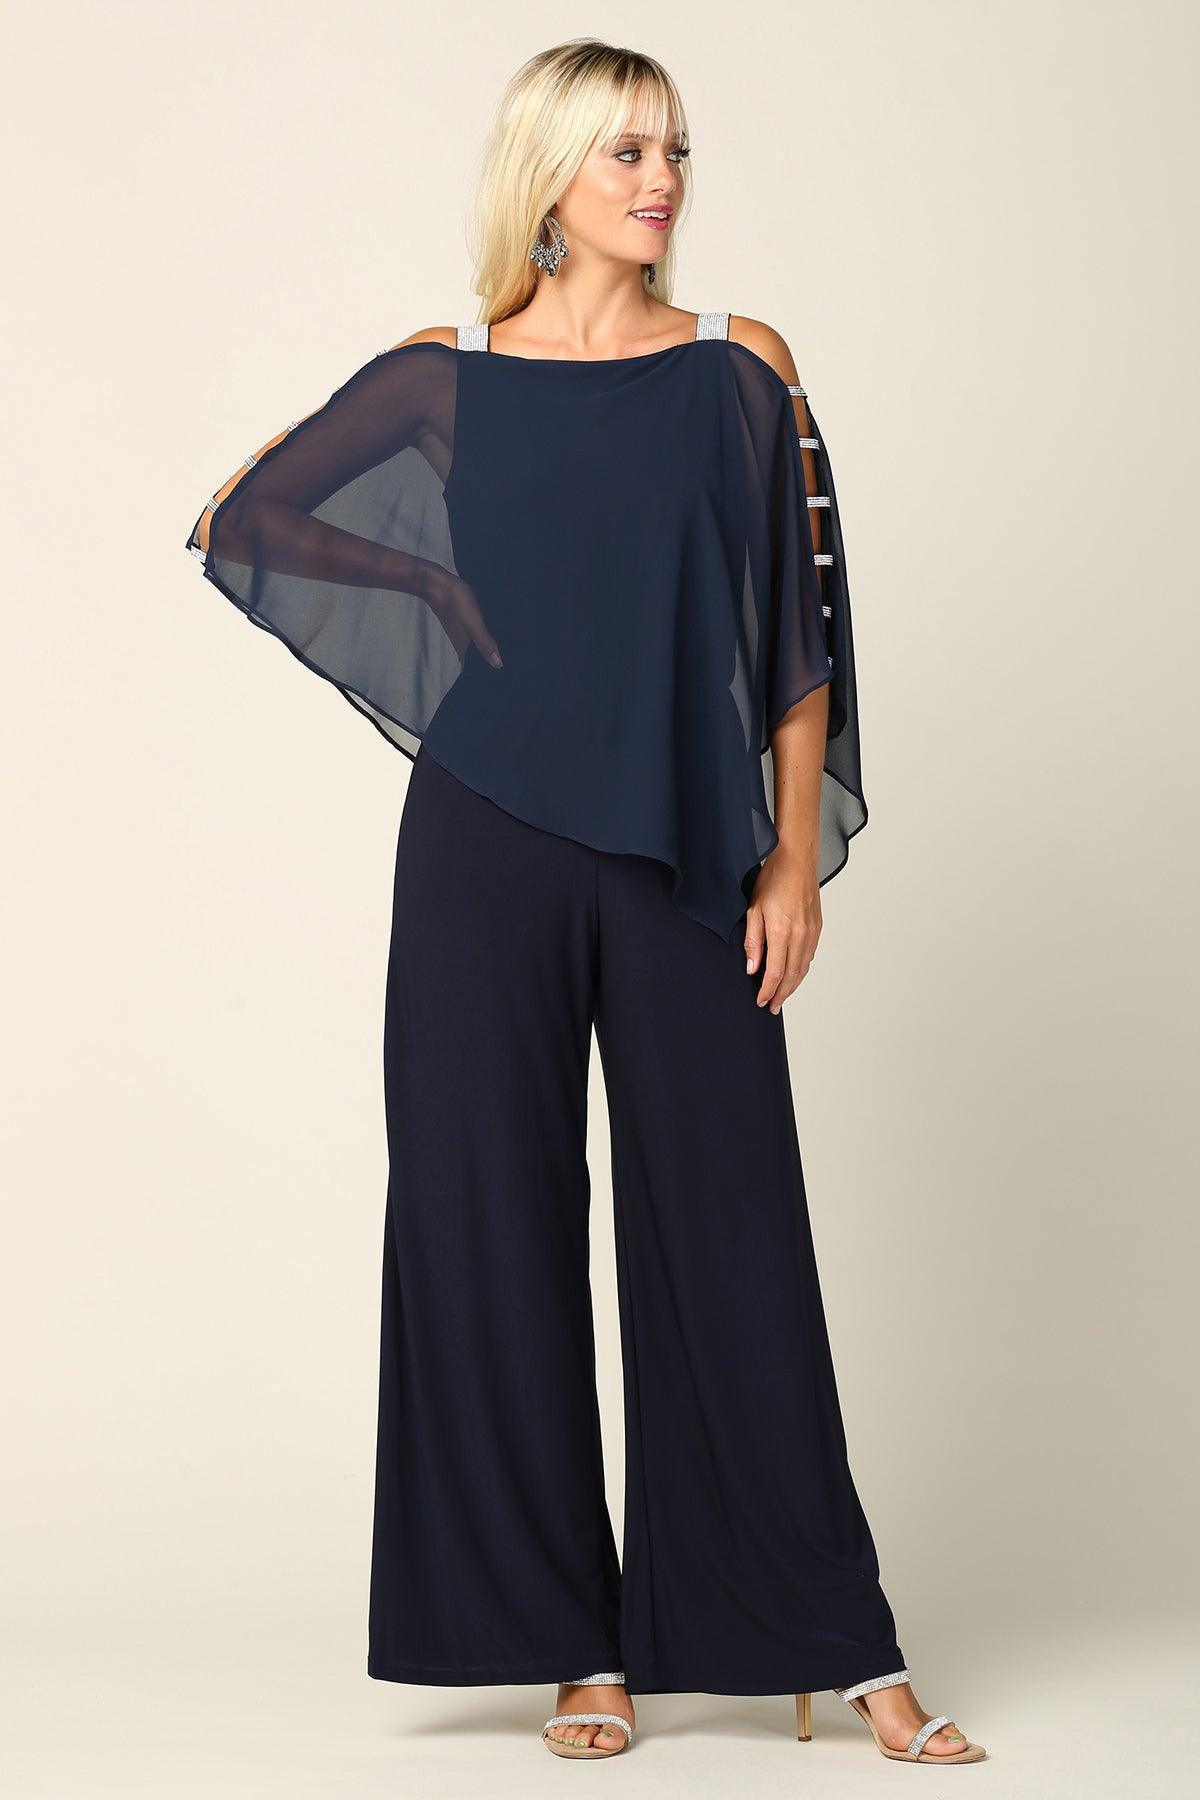 Charcoal Formal Chiffon Cape Overlay Jumpsuit Sale for $56.99 – The ...